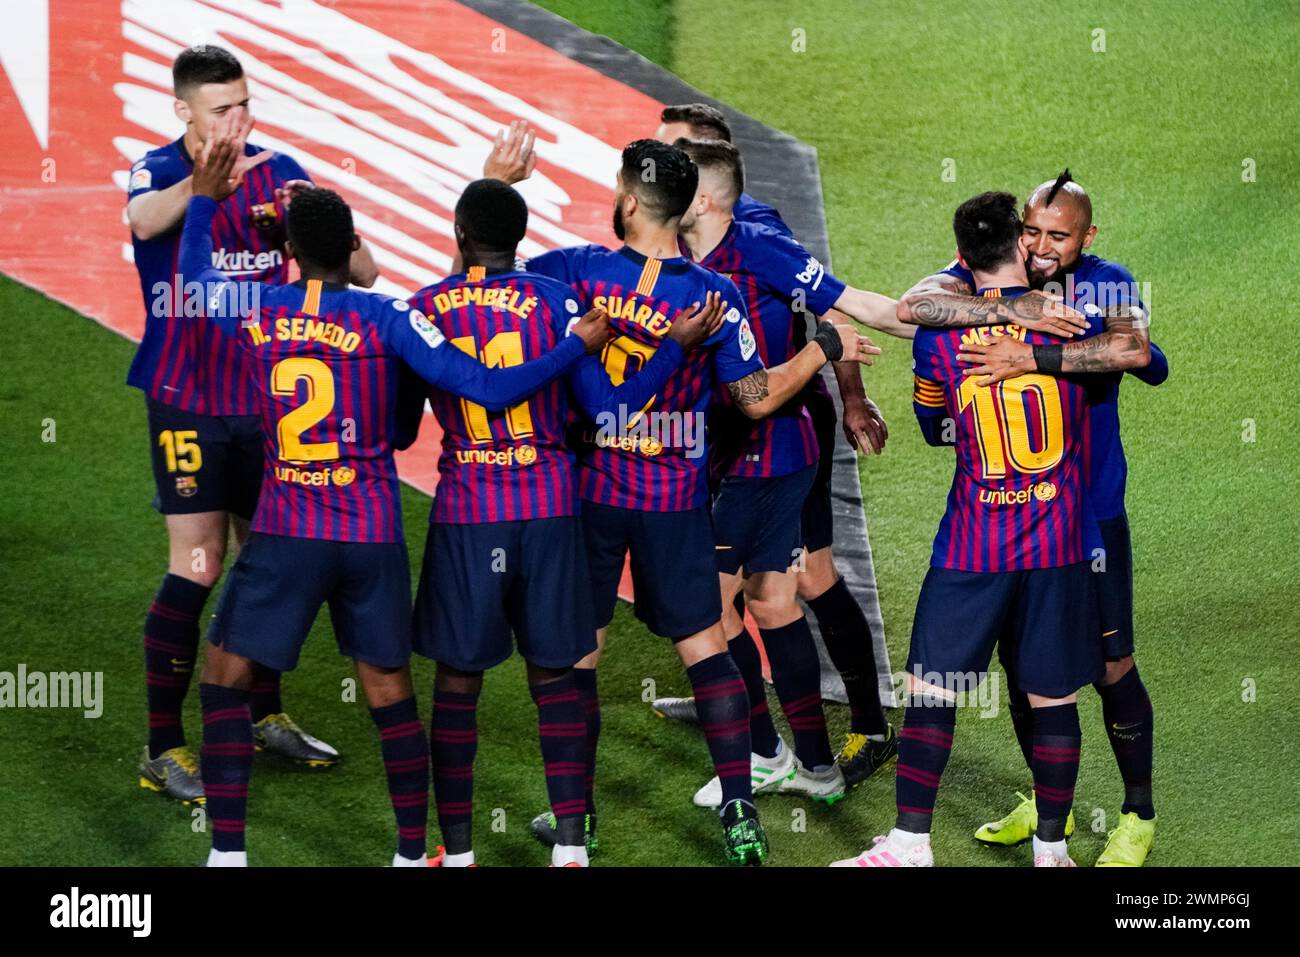 LIONEL MESSI, VIDAL, GOAL CELEBRATION, BARCELONA FC, 2019: Lionel Messi scores the winning goal in the 62nd minute and is hugged by Arturo Vidal as his teammates celebrate. The final game of the La Liga 2018-19 season in Spain between Barcelona FC and Levante at Camp Nou, Barcelona on 27 April 2019. Barca won the game 1-0 with a second half Messi goal to clinch back-to-back La Liga titles and their eighth in 11 years. Stock Photo